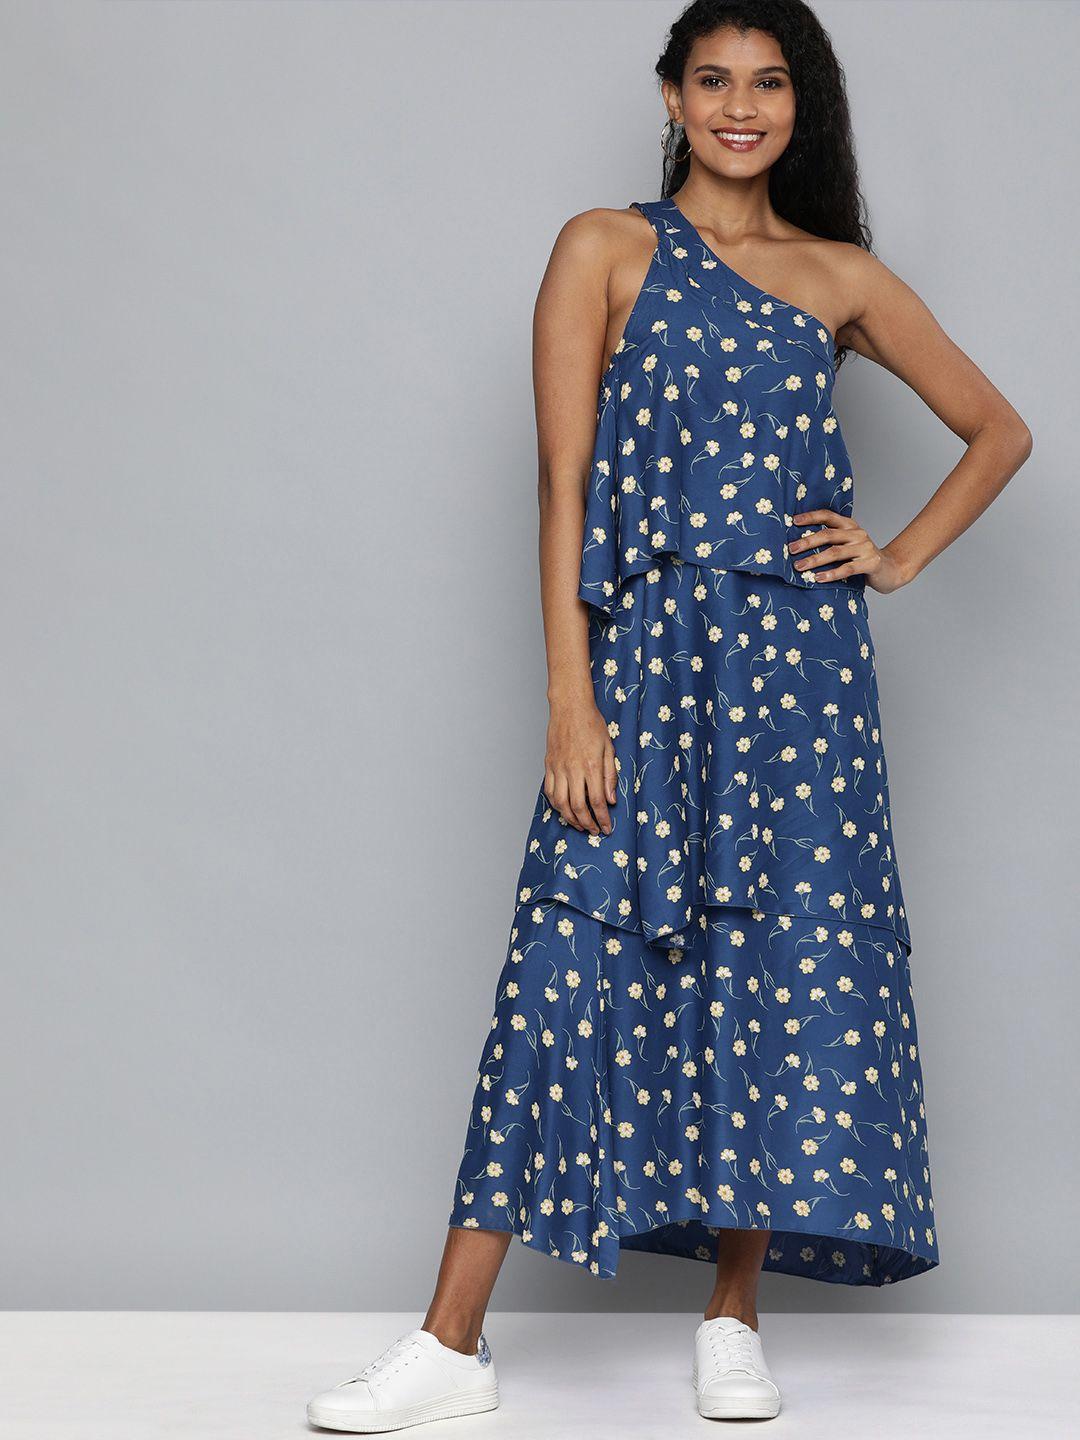 here&now women navy blue & yellow floral printed a-line dress